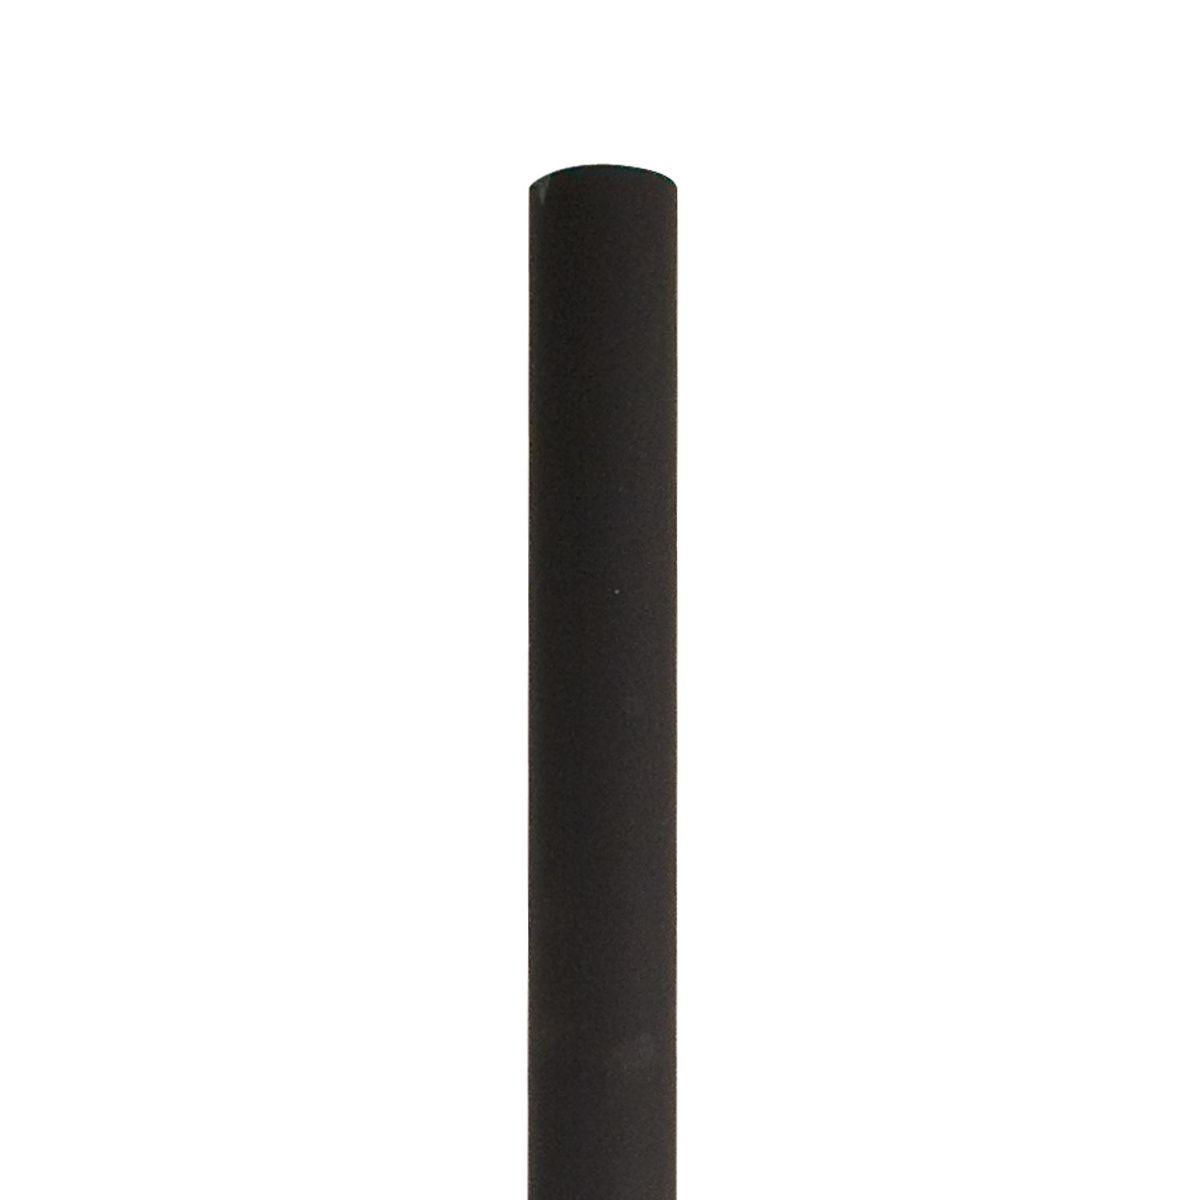 8 ft Round Aluminum Direct Burial Pole 3 In. Shaft Black Finish